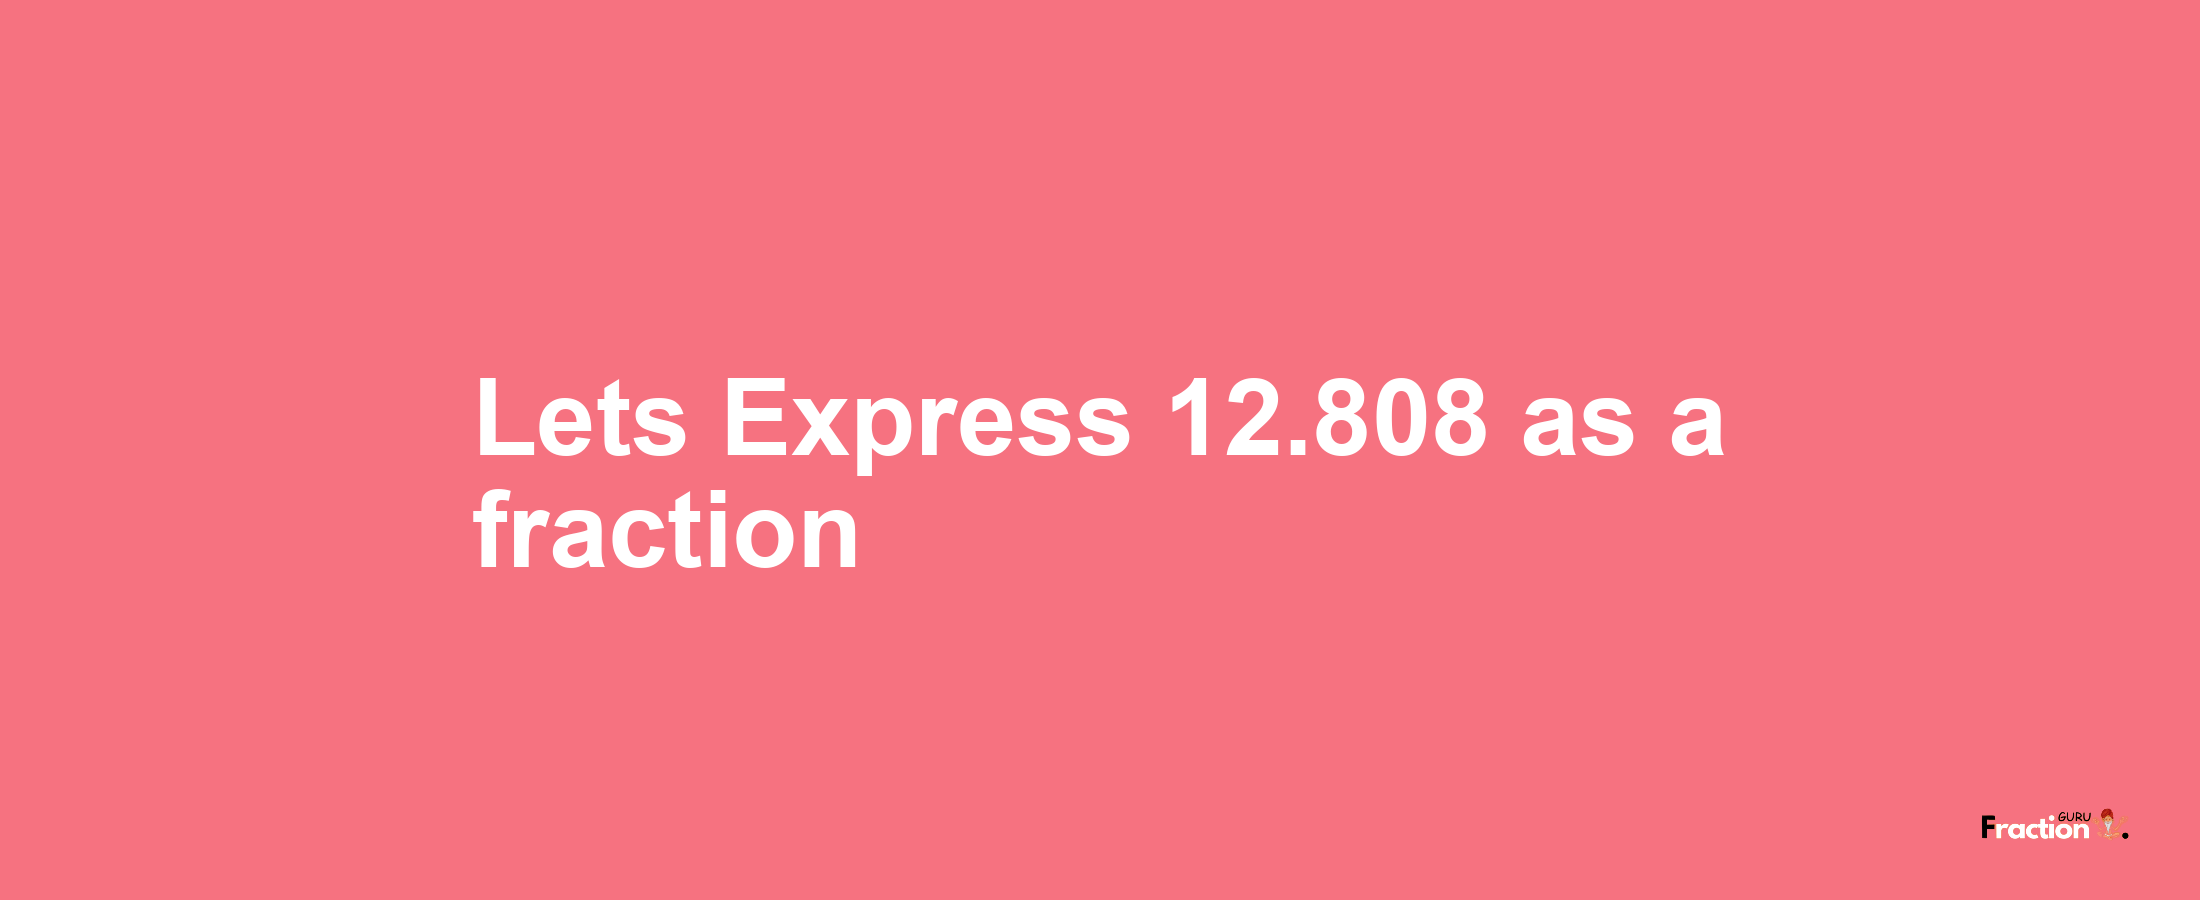 Lets Express 12.808 as afraction